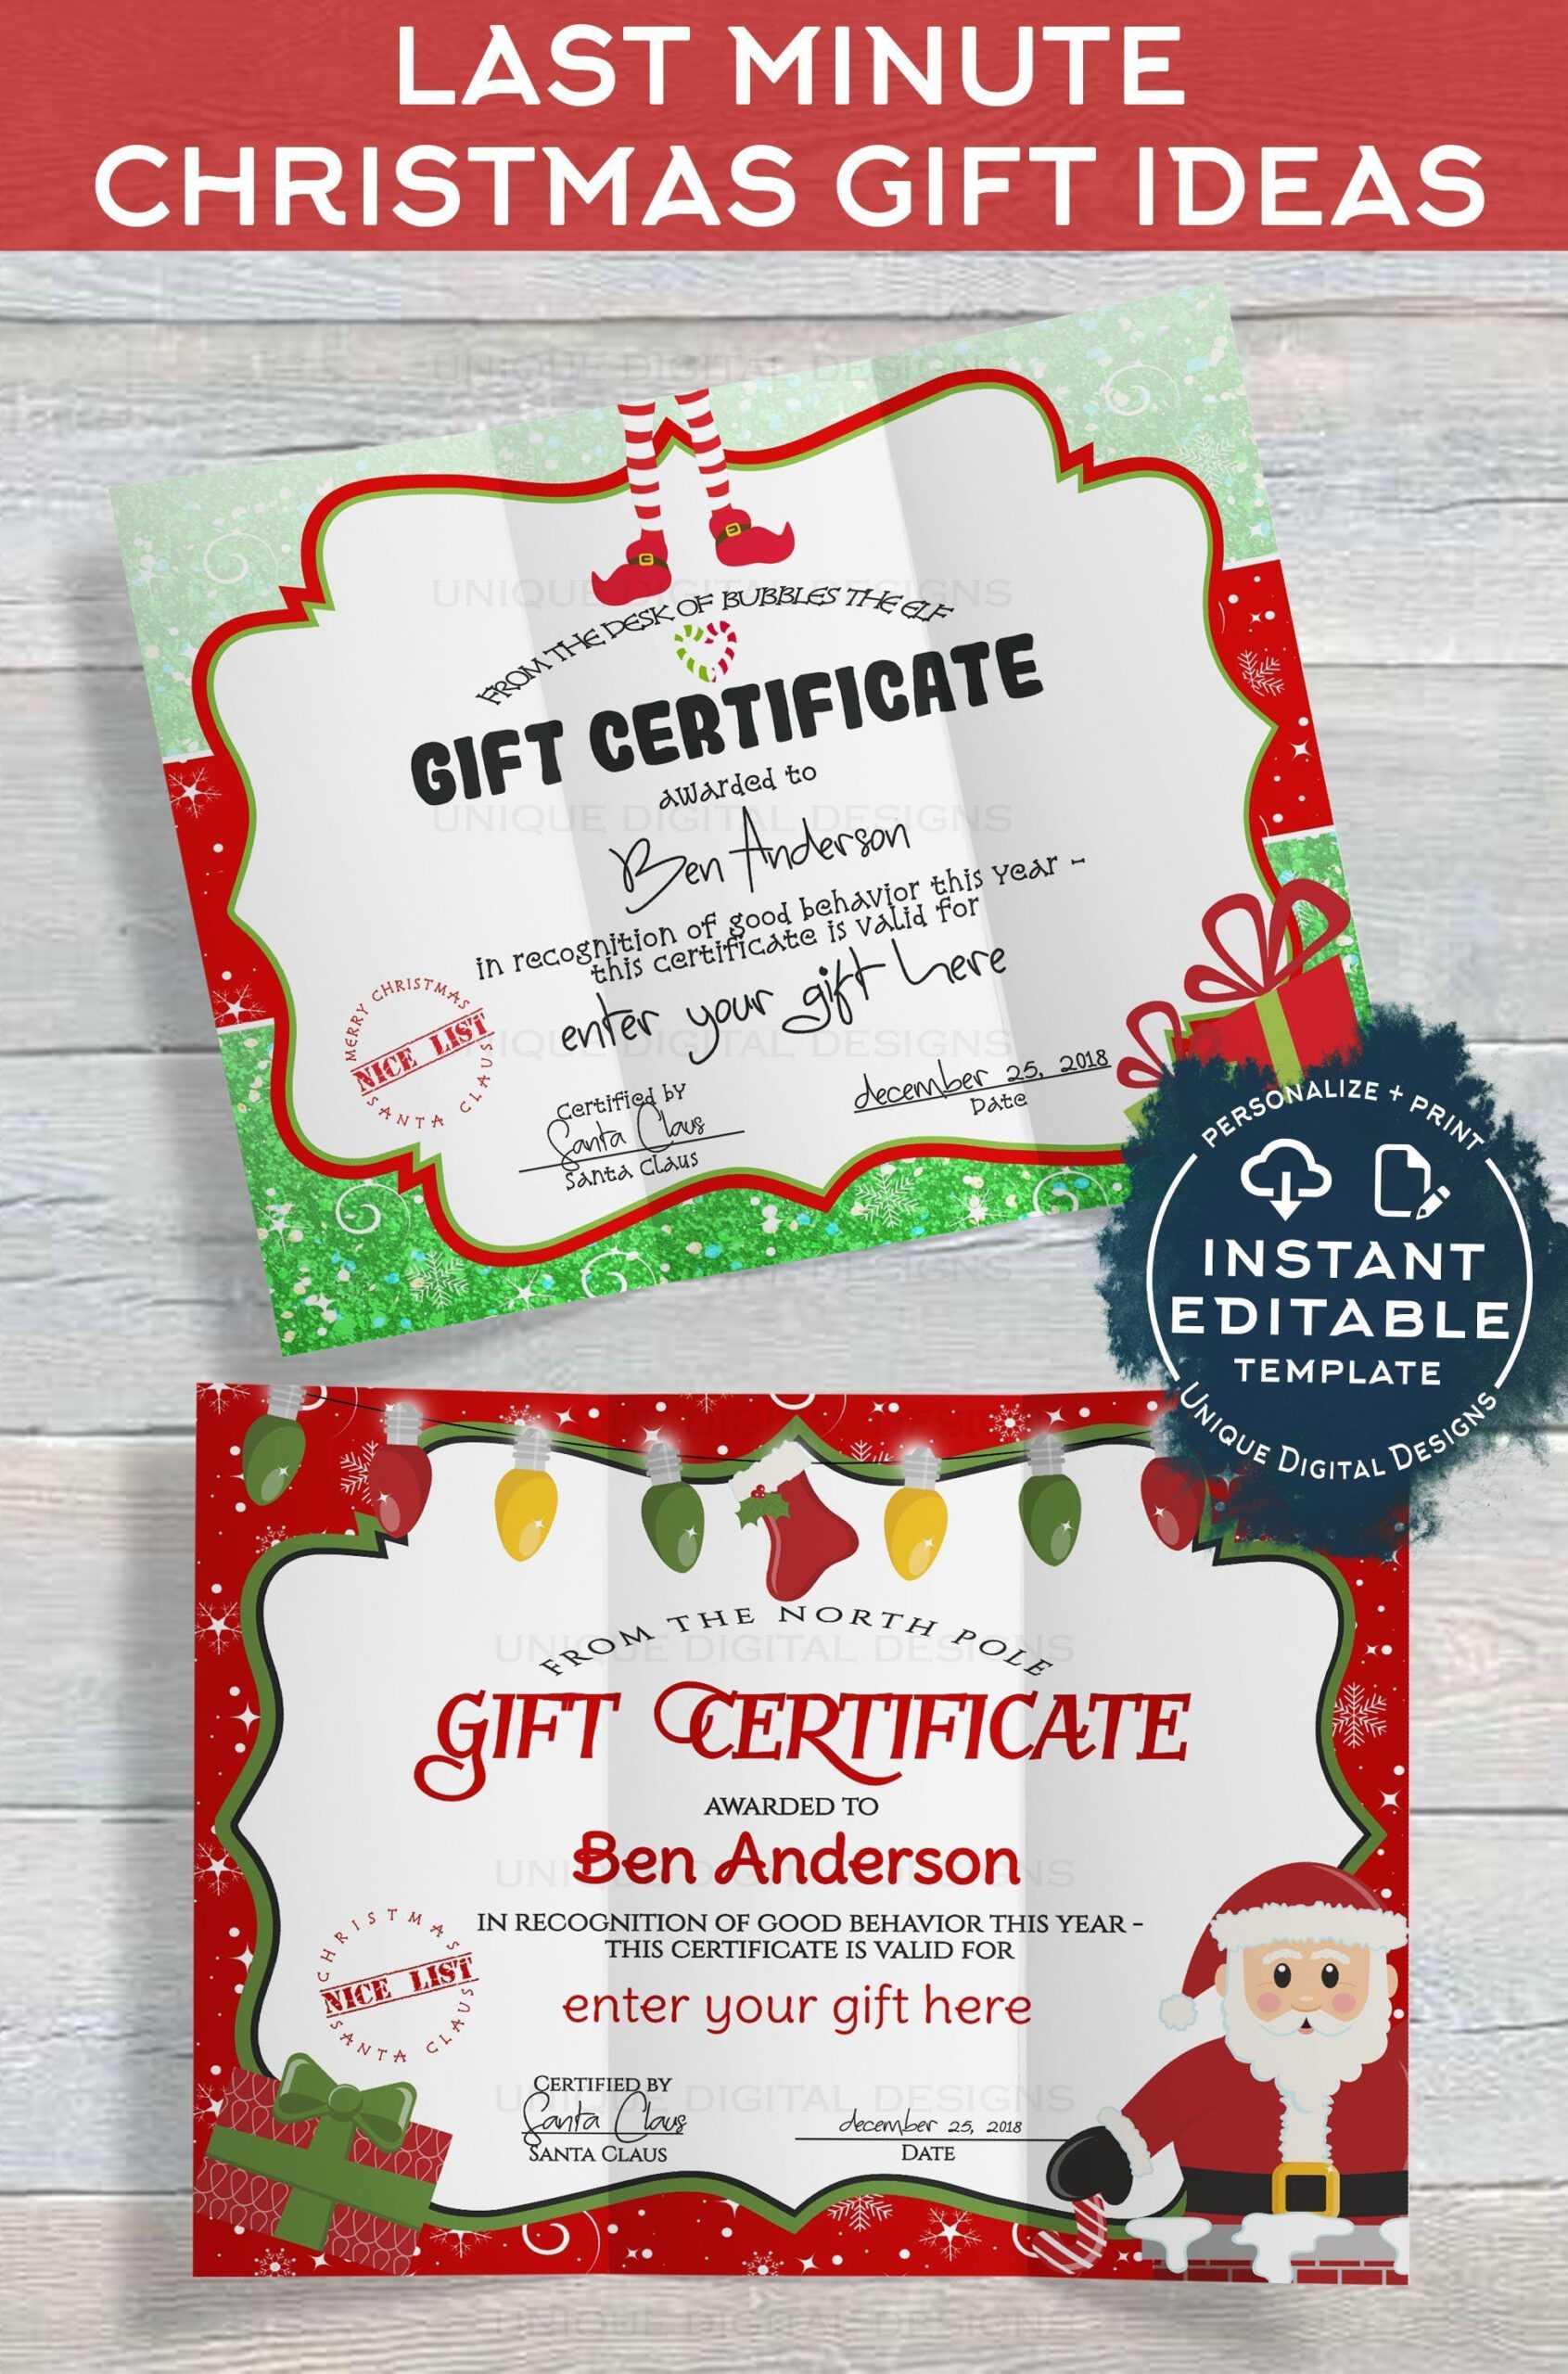 Gift Certificate Template, Editable Gift Certificate From Inside Christmas Gift Certificate Template Free Download